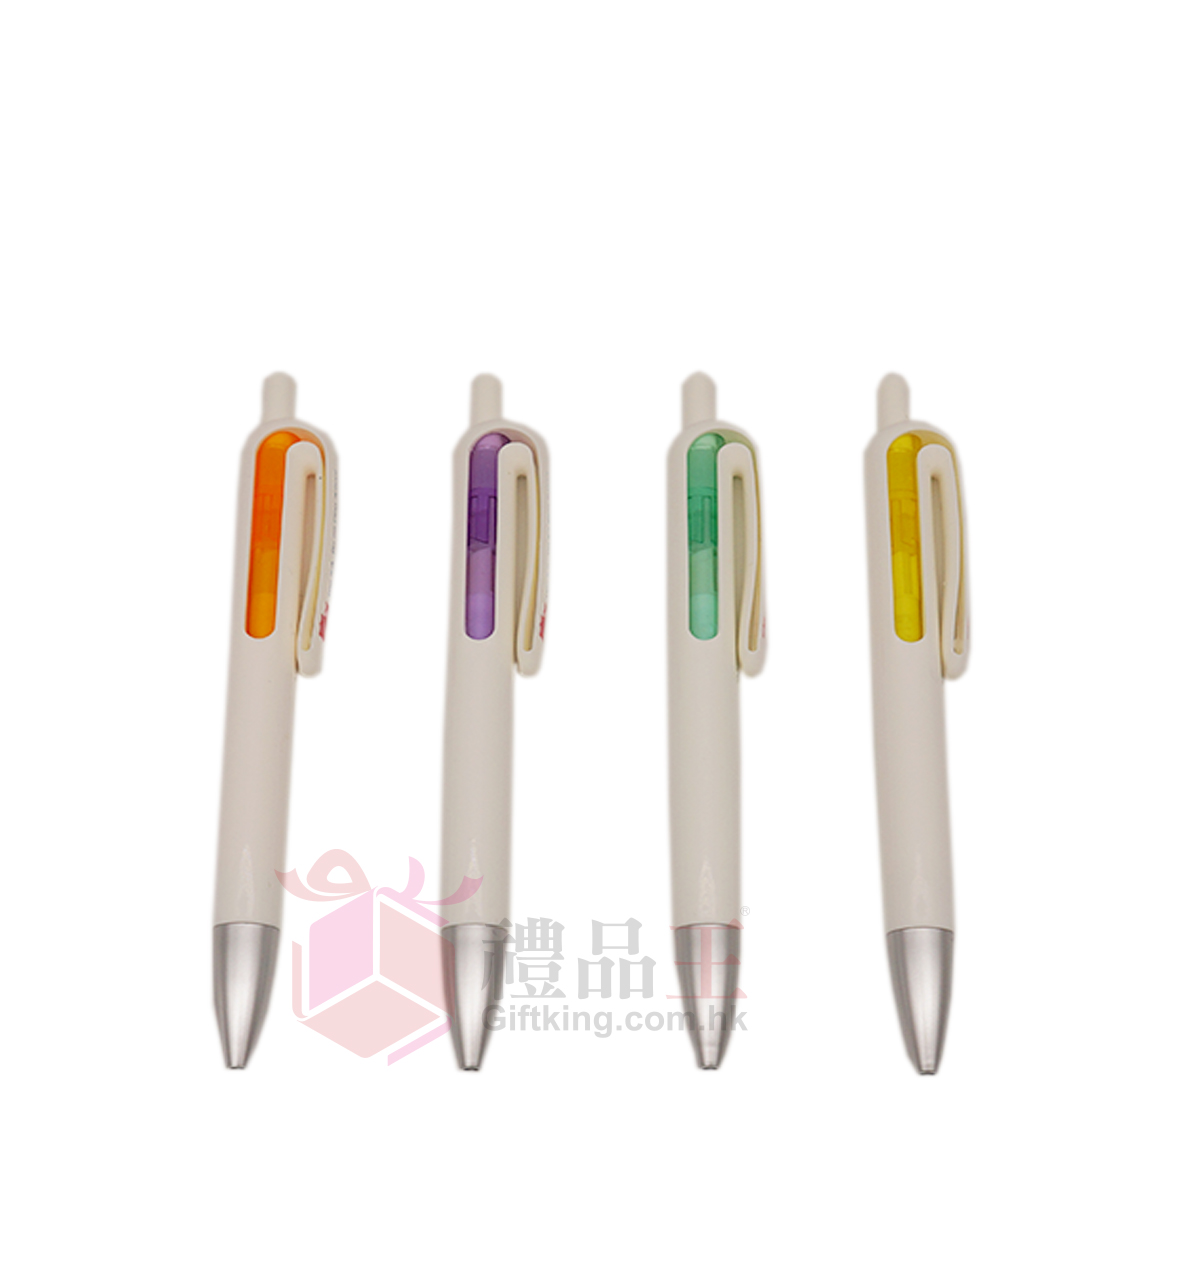 Salvation Army Ball Pen (Stationery Gift)